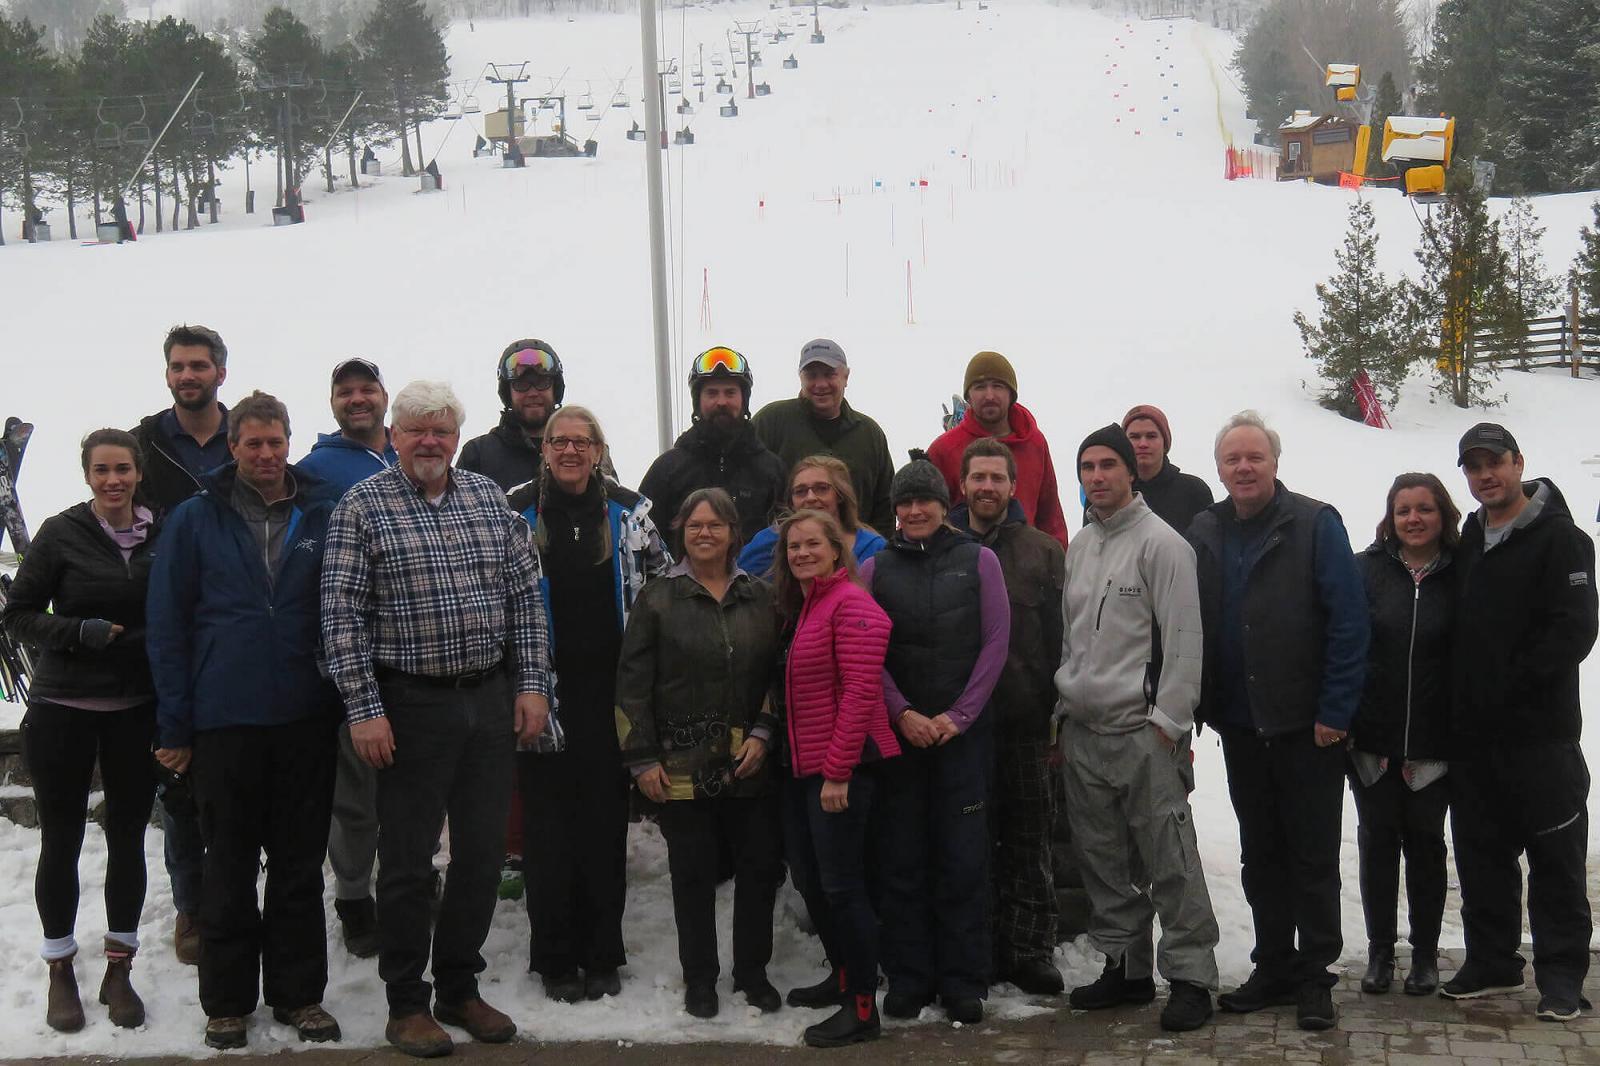  Ski and Spa Day participants enjoyed great conditions on Feb. 7.